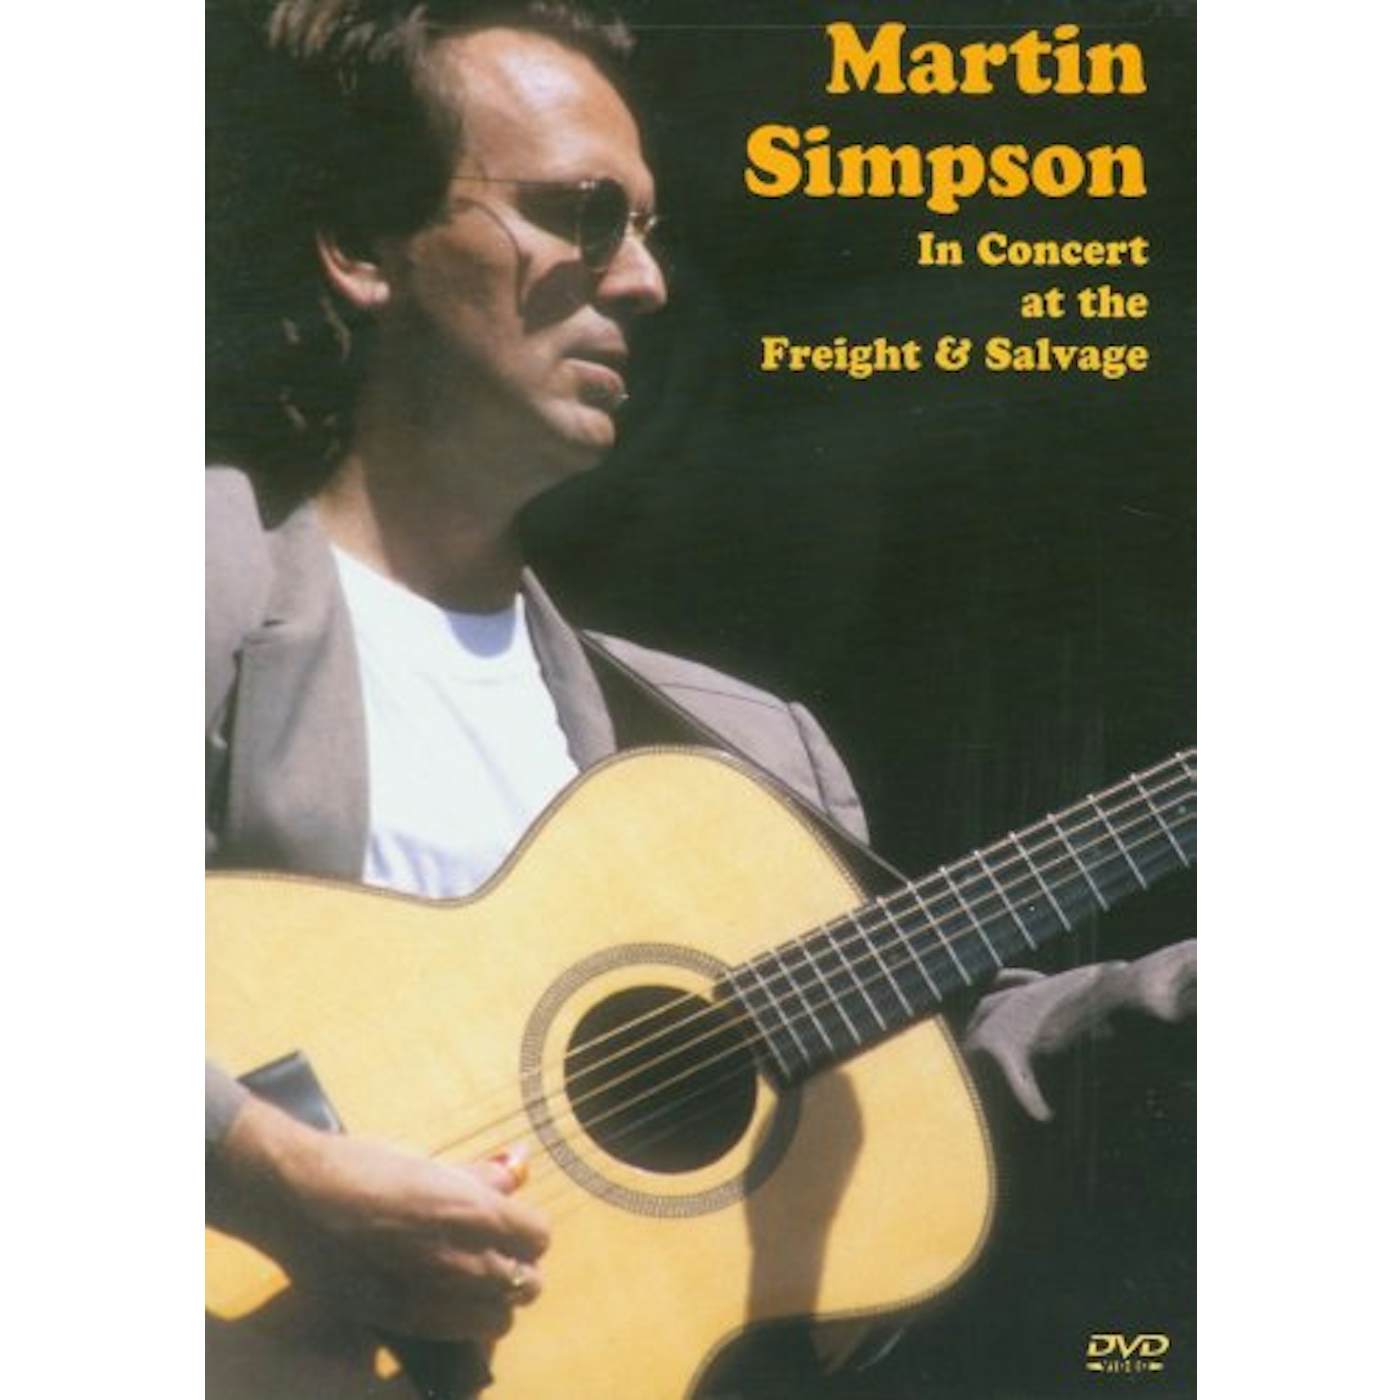 Martin Simpson IN CONCERT AT THE FREIGHT & SALVAGE DVD